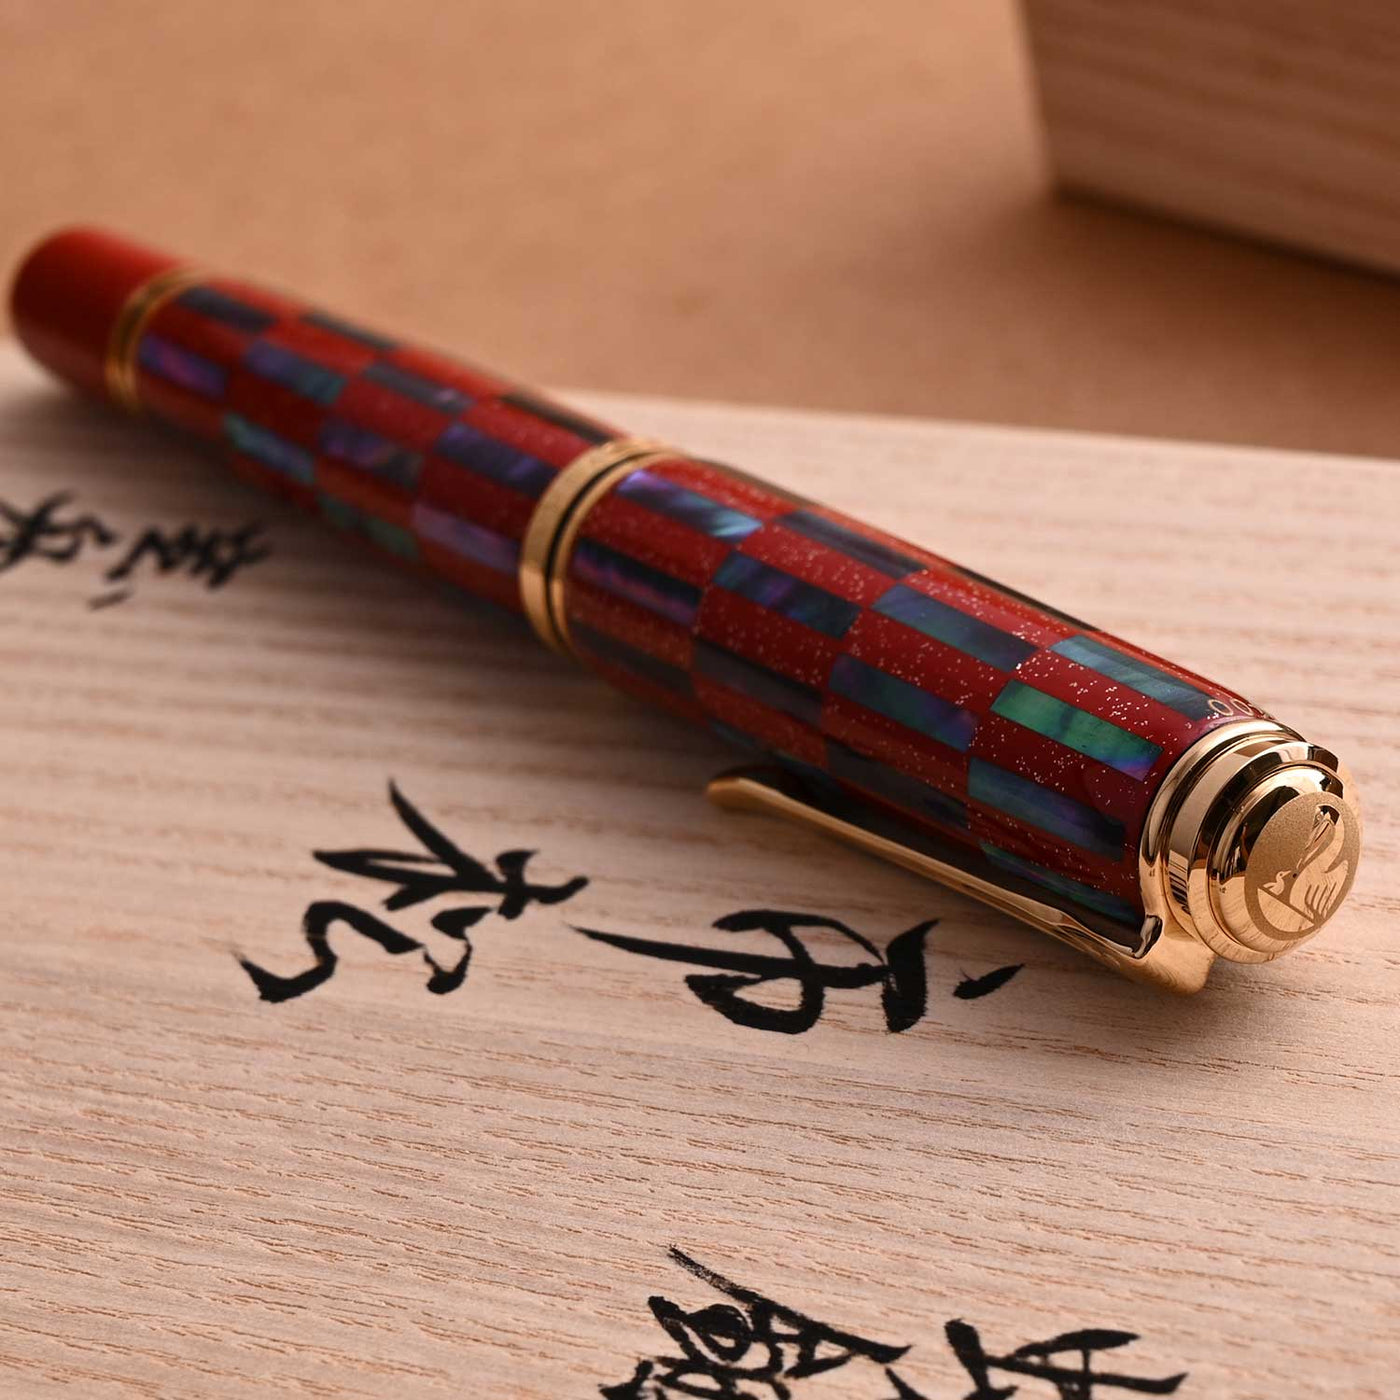 Pelikan M1000 Fountain Pen - Raden Red Infinity (Limited Edition) 14